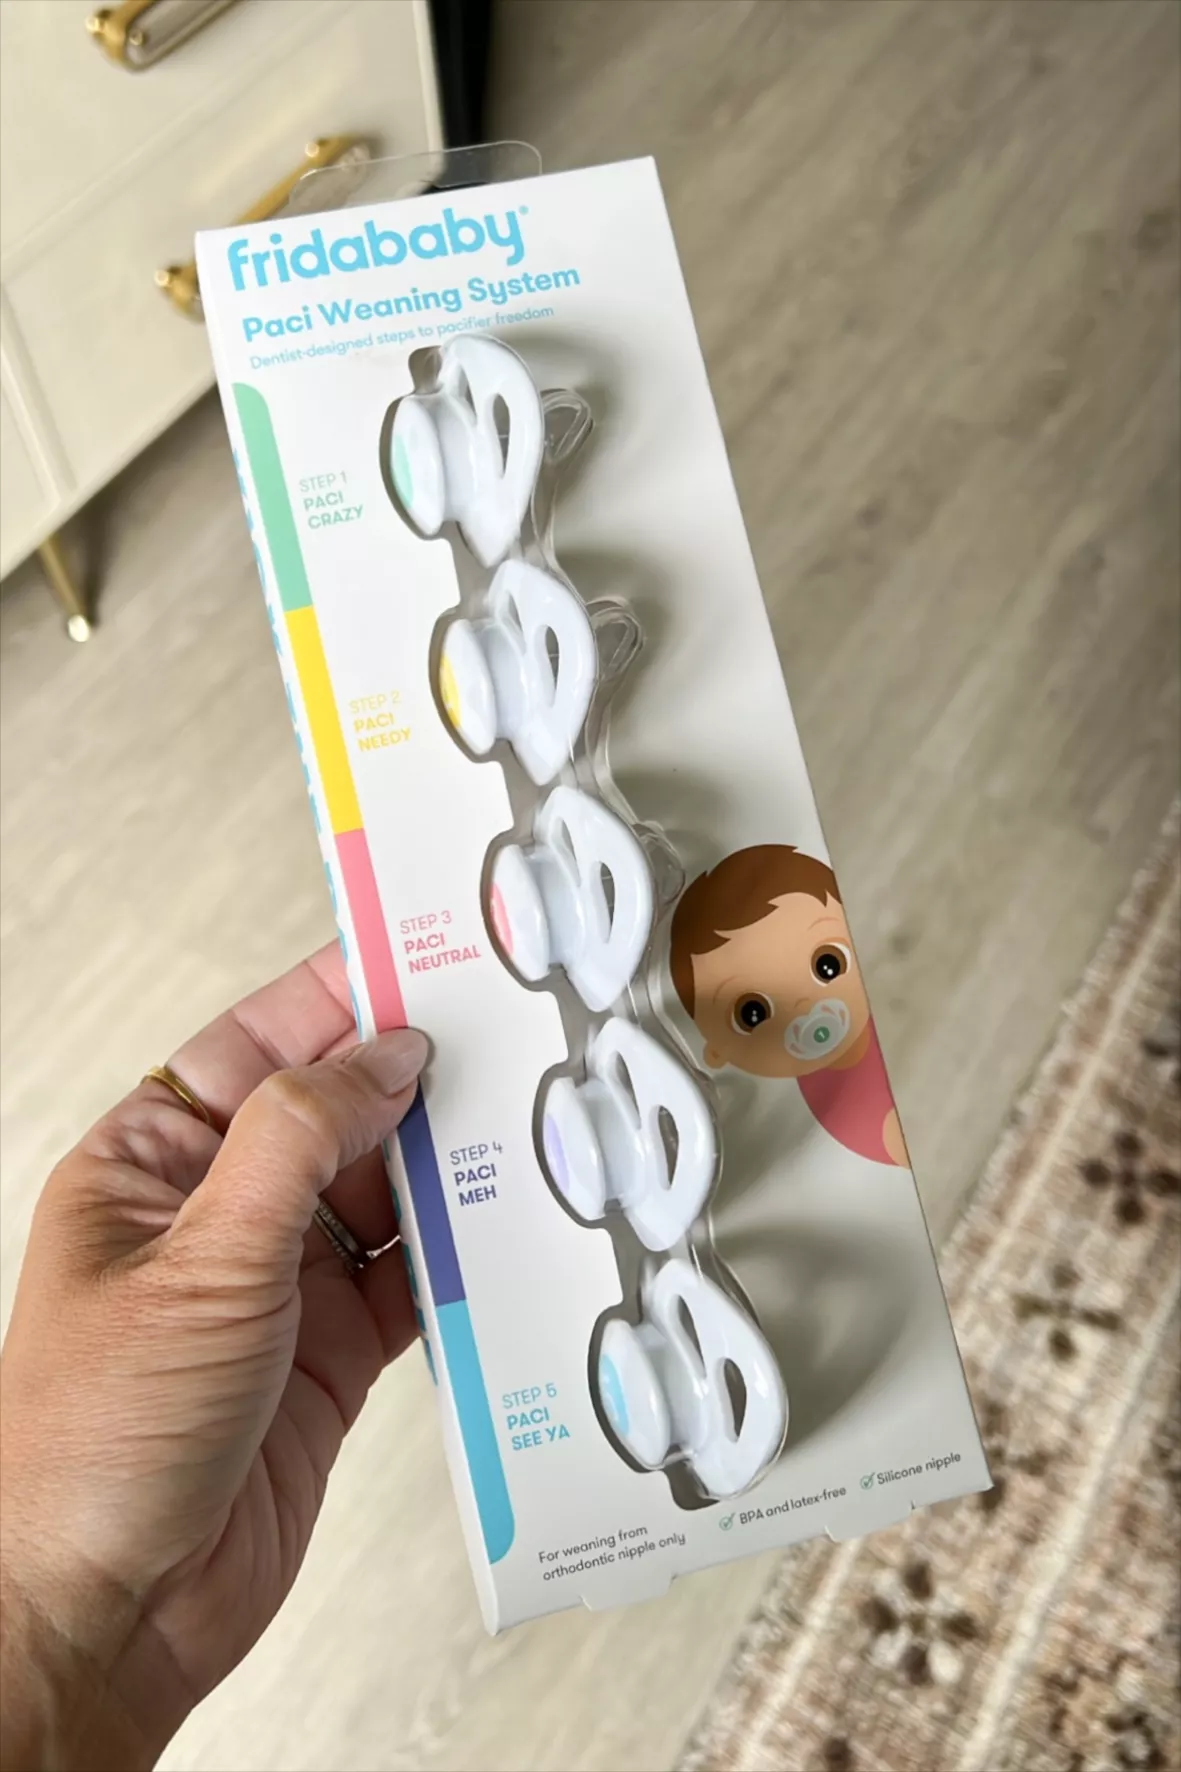 Paci Weaning System – Frida